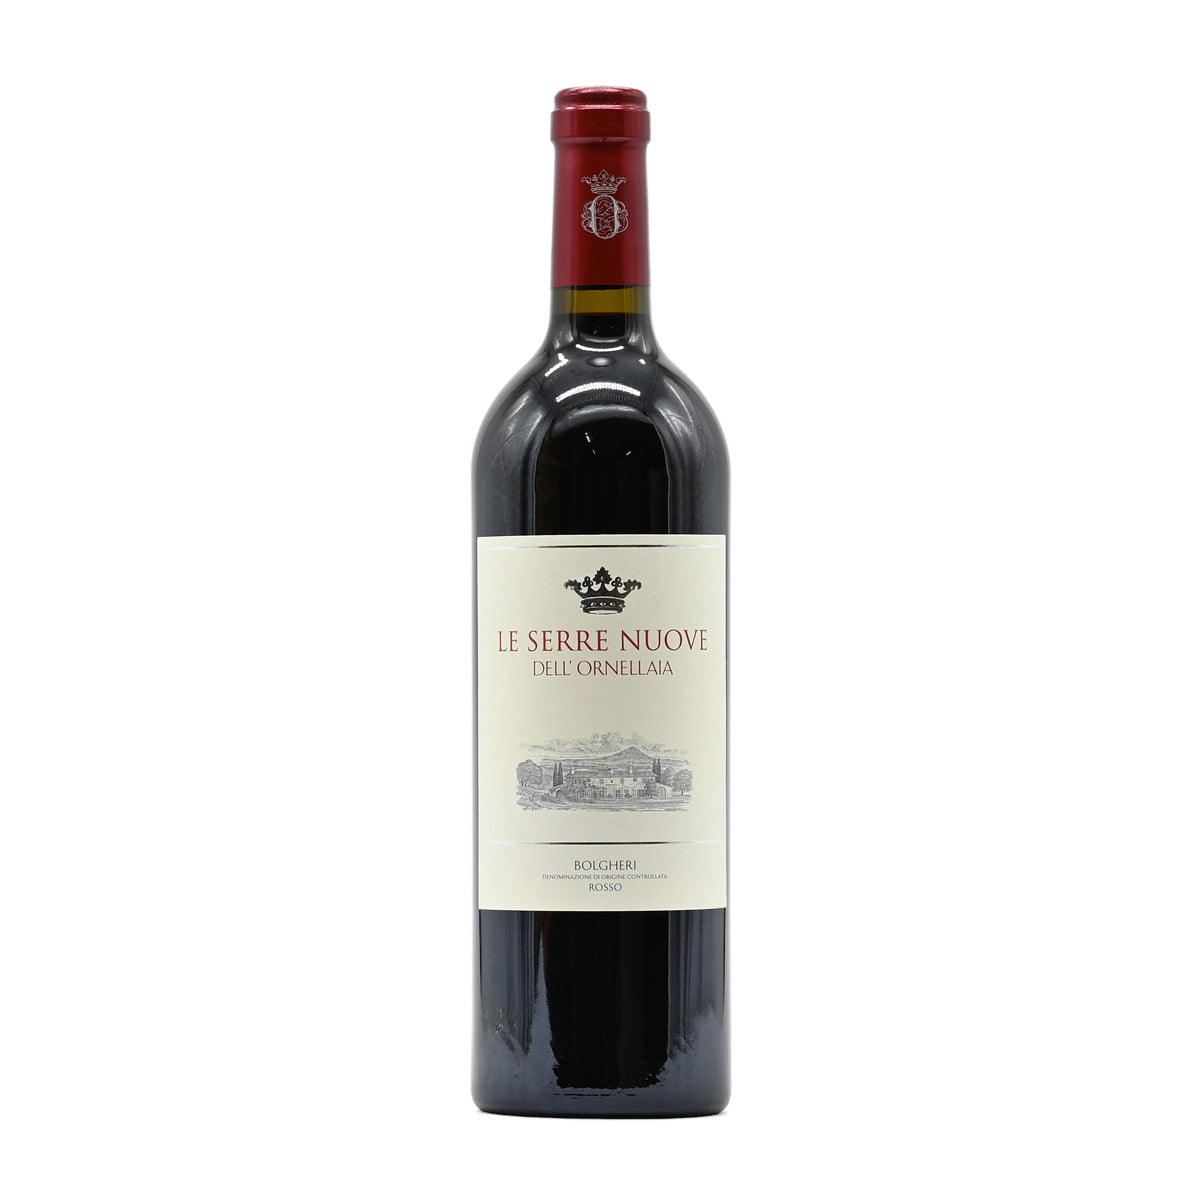 Le Serre Nuove dell'Ornellaia Bolgheri Rosso 2020, 750ml Italian red wine; made from a blend of Merlot, Cabernet Sauvignon, Cabernet Franc, and Petit Verdot; from Bolgheri, Tuscany, Italy – GDV Fine Wines, Hong Kong